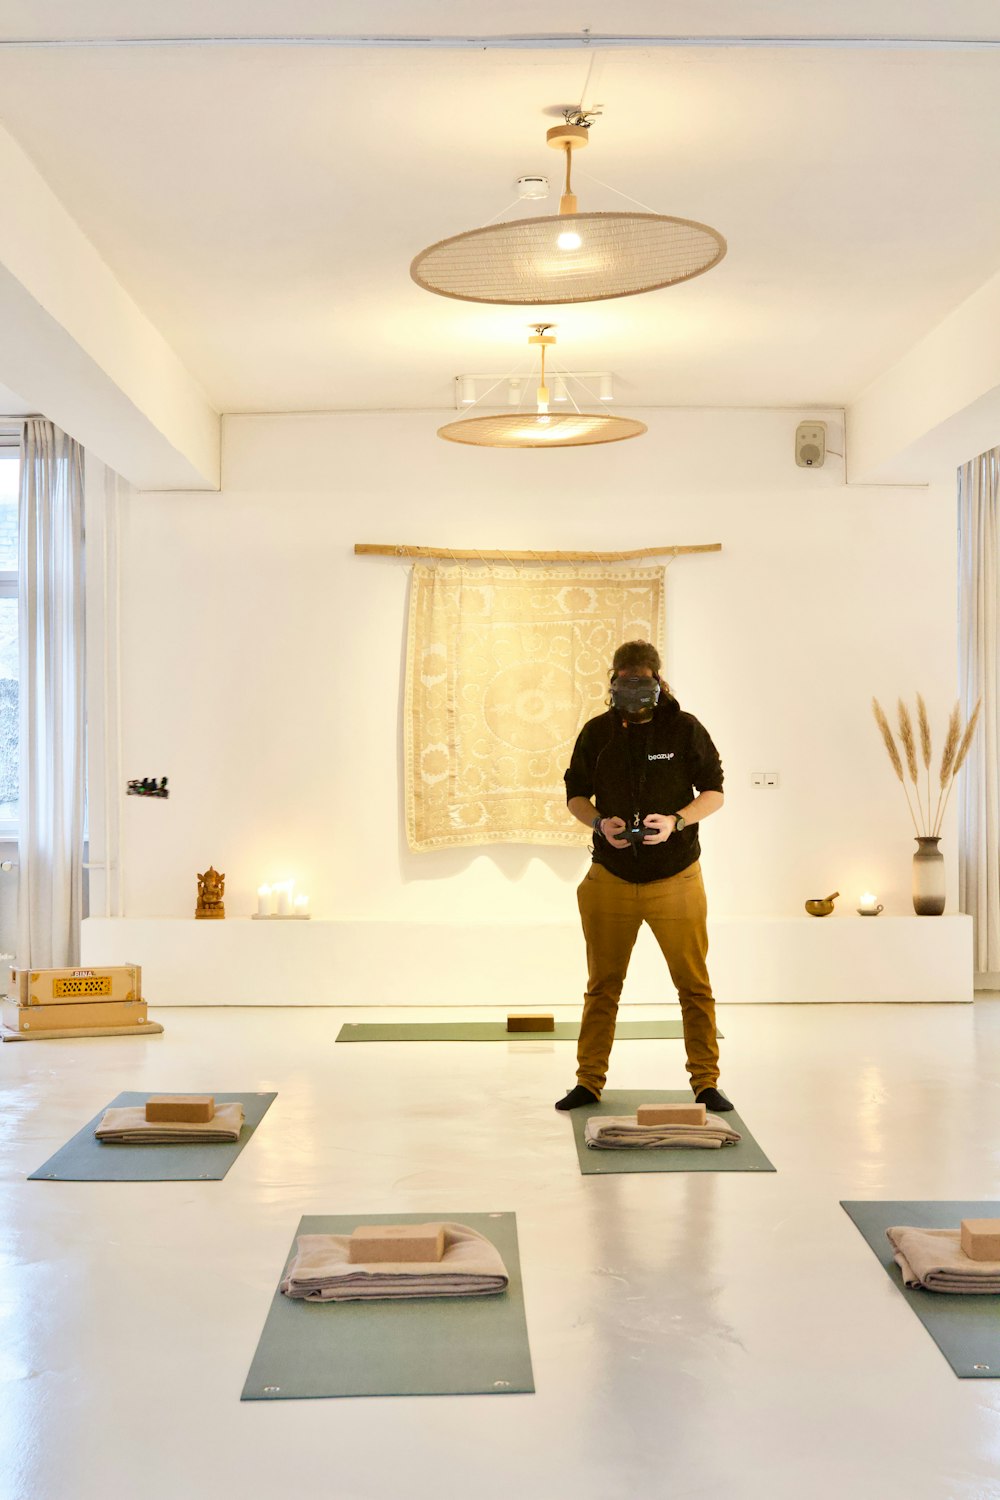 a man standing on a yoga mat in a room